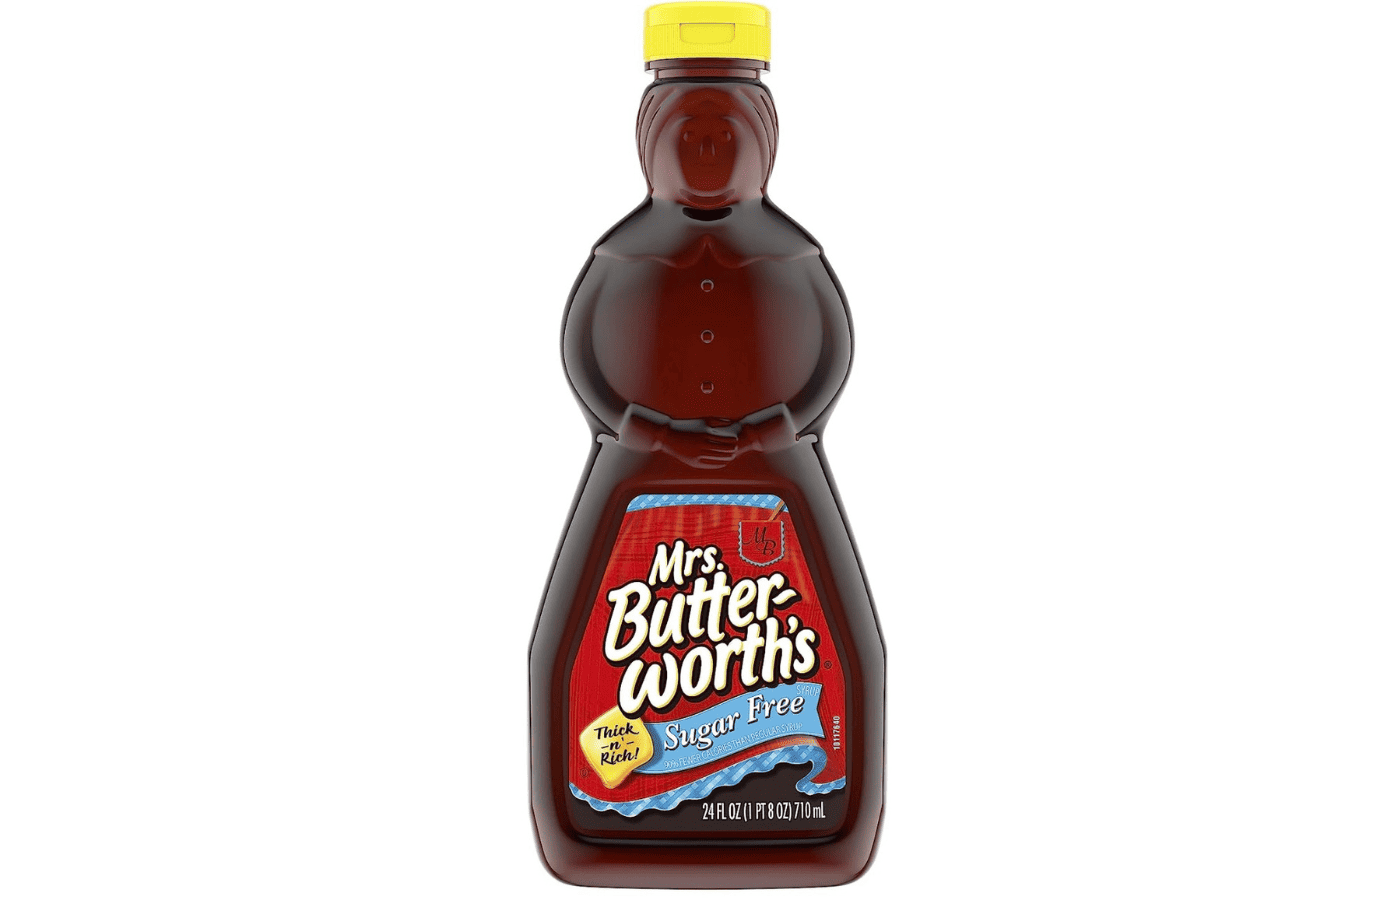 Does mrs buttersworths syrup go bad